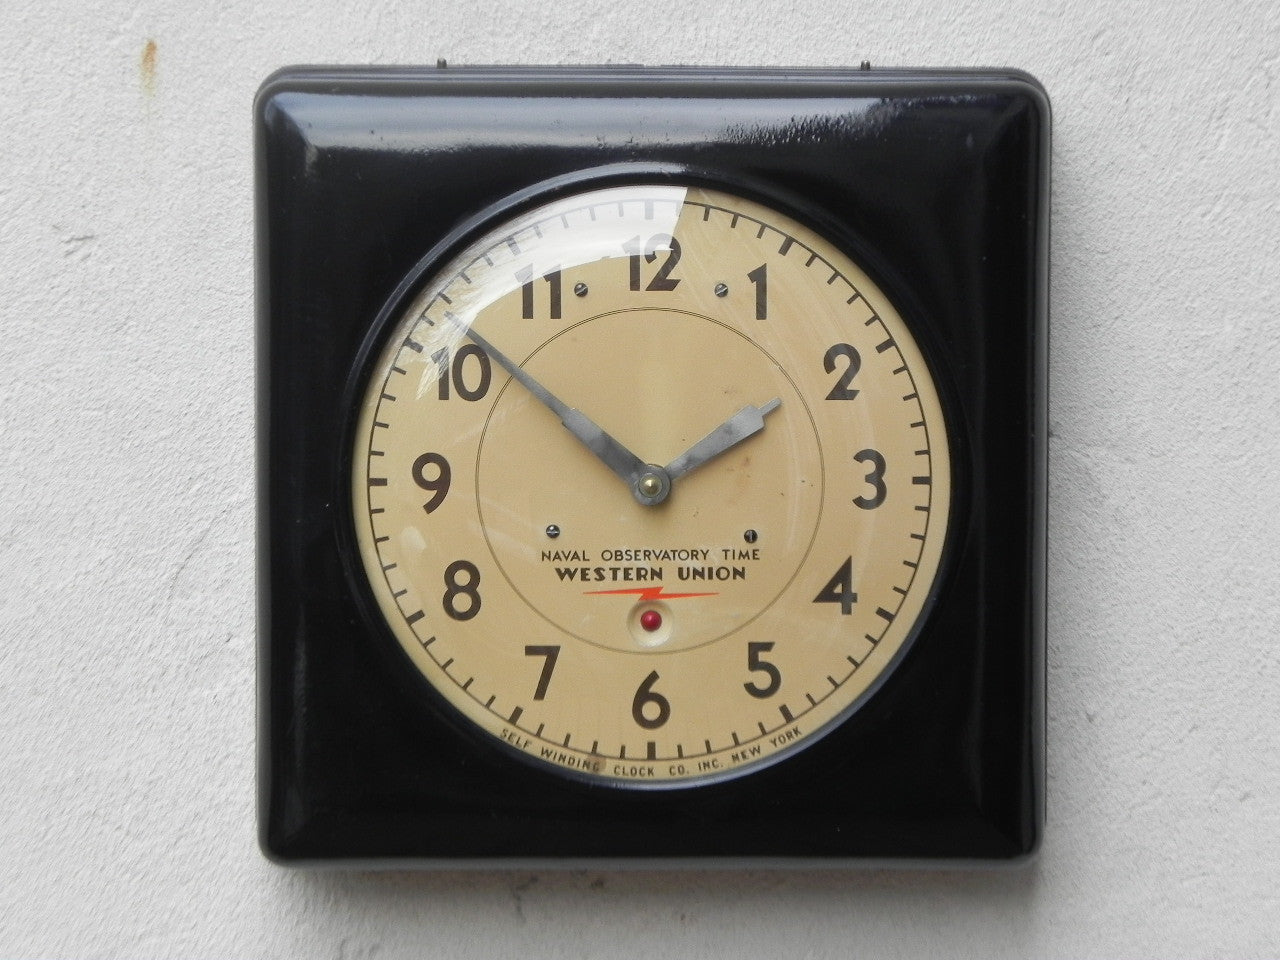 A CLOCK FROM THE OLD "INTERNET OF CLOCKS"